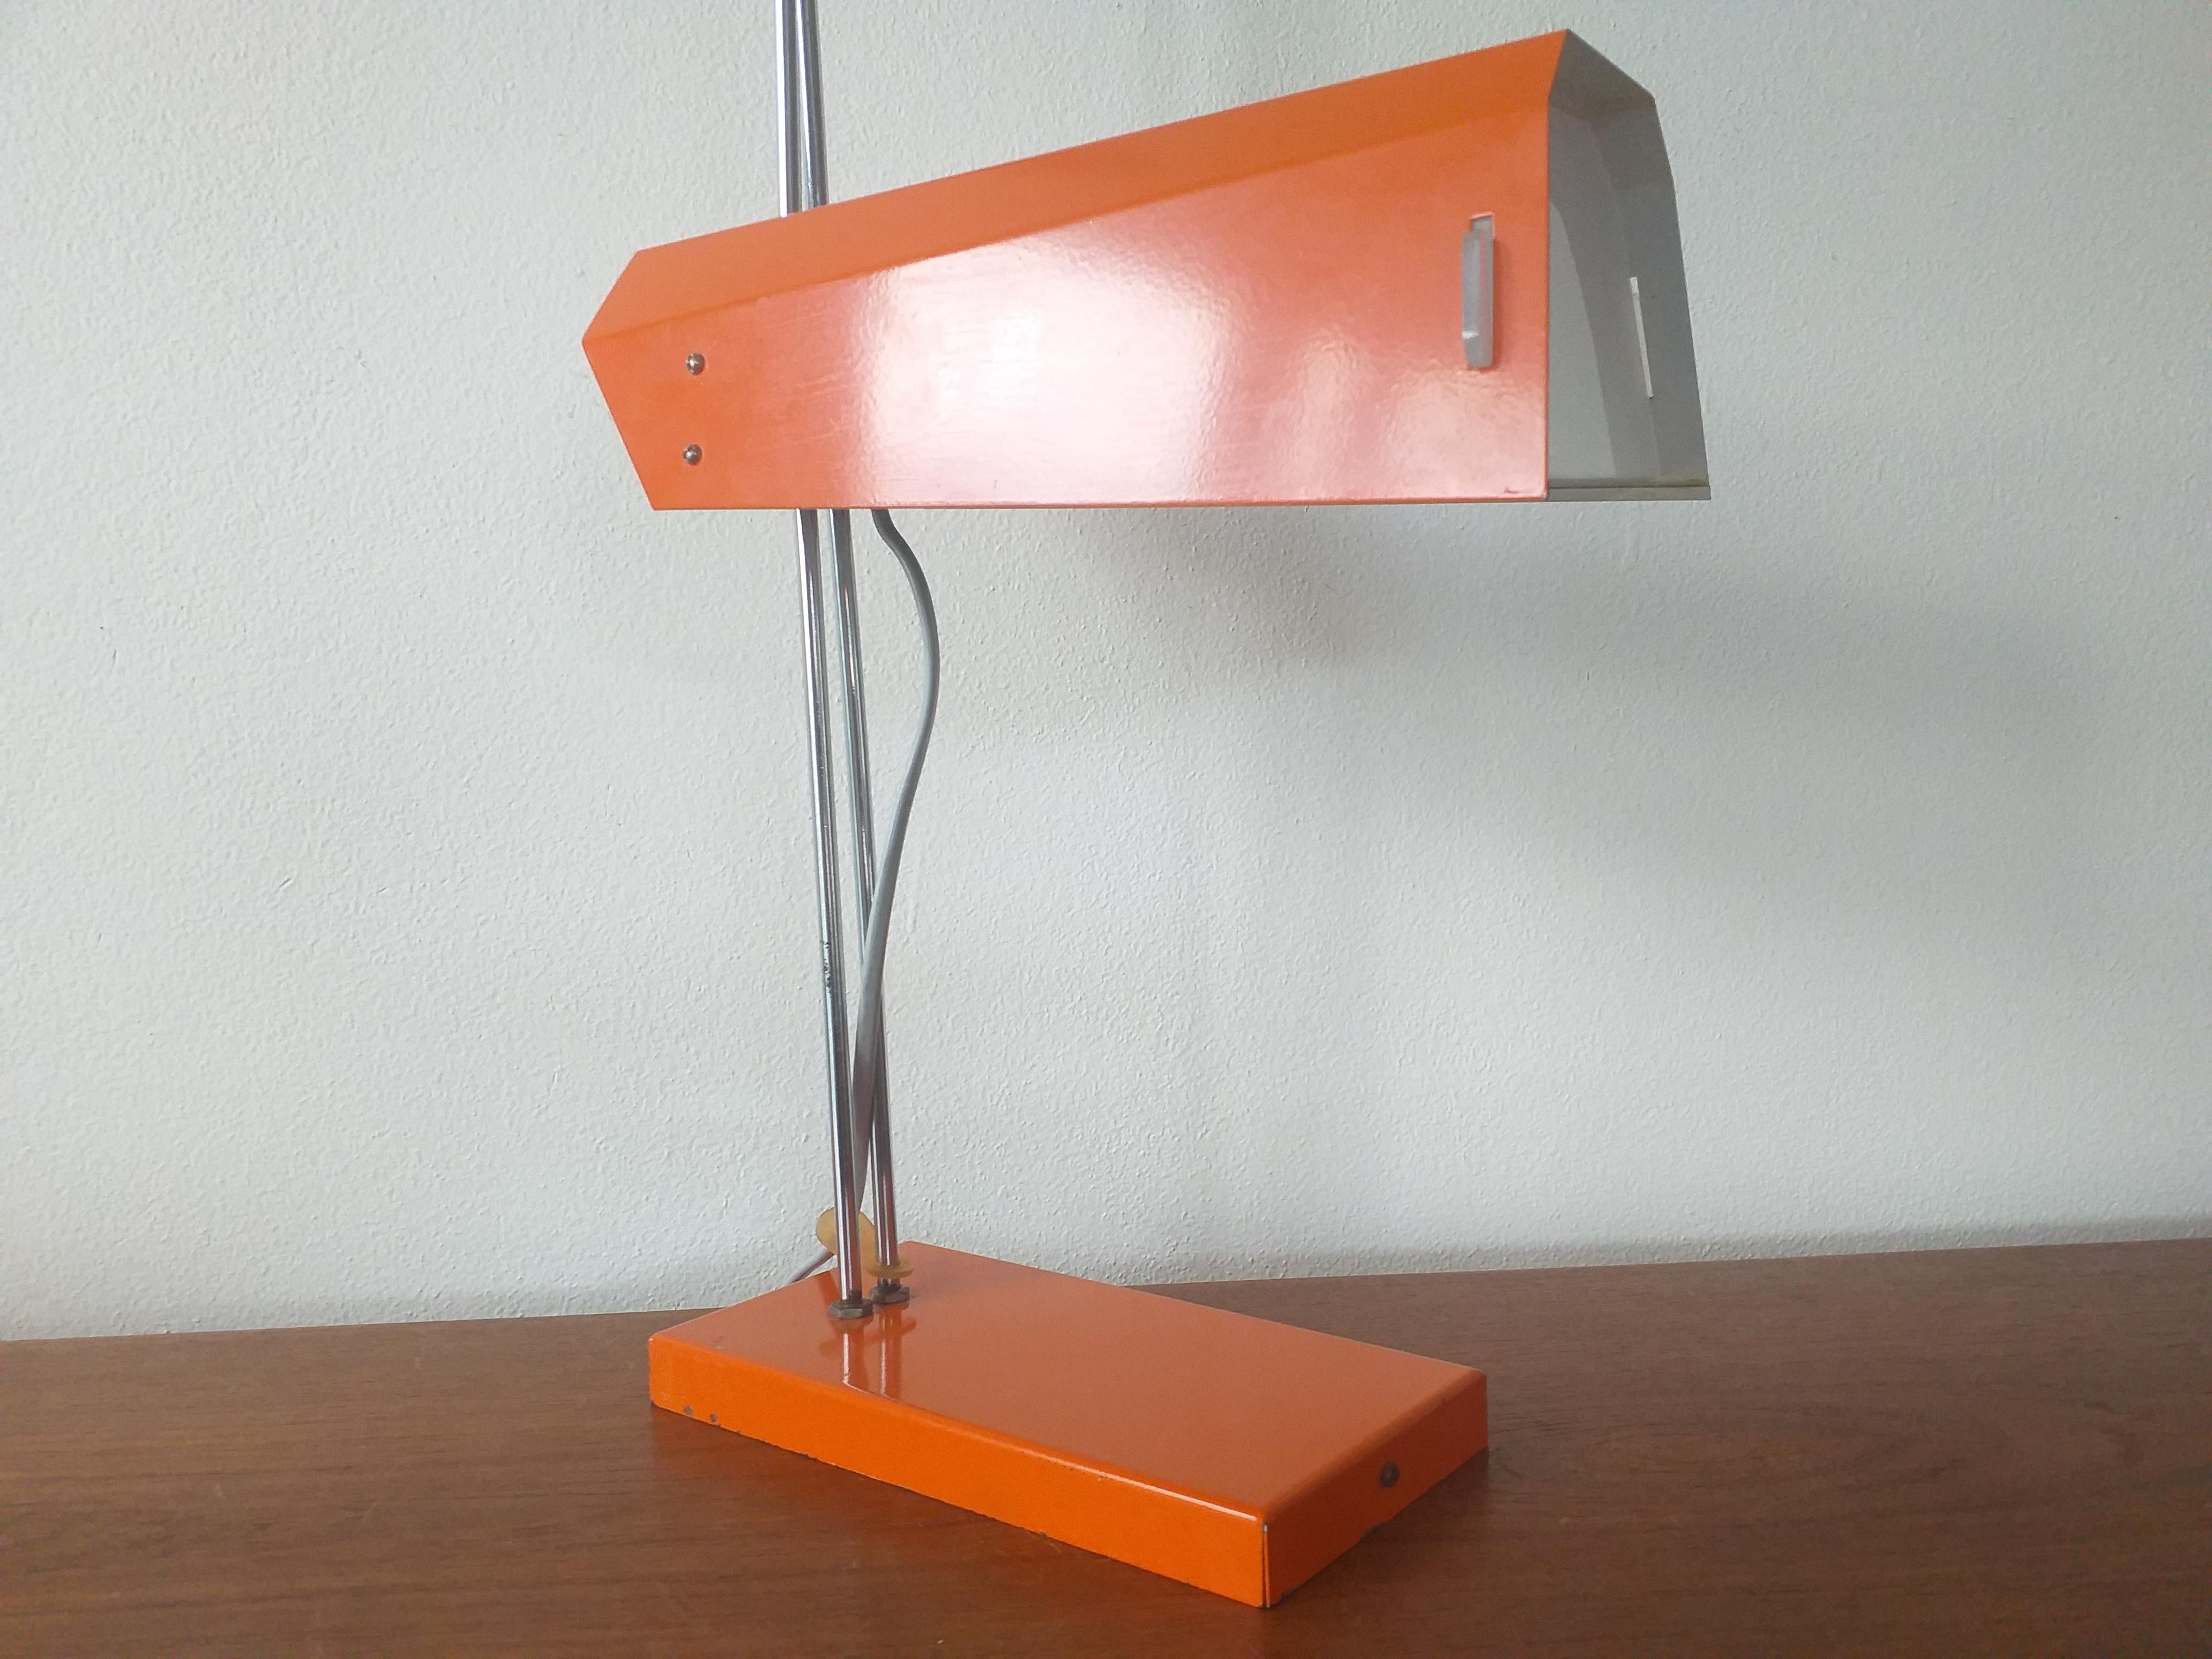 Lacquered Midcentury Table Lamp Lidokov Designed by Josef Hurka, 1970s For Sale